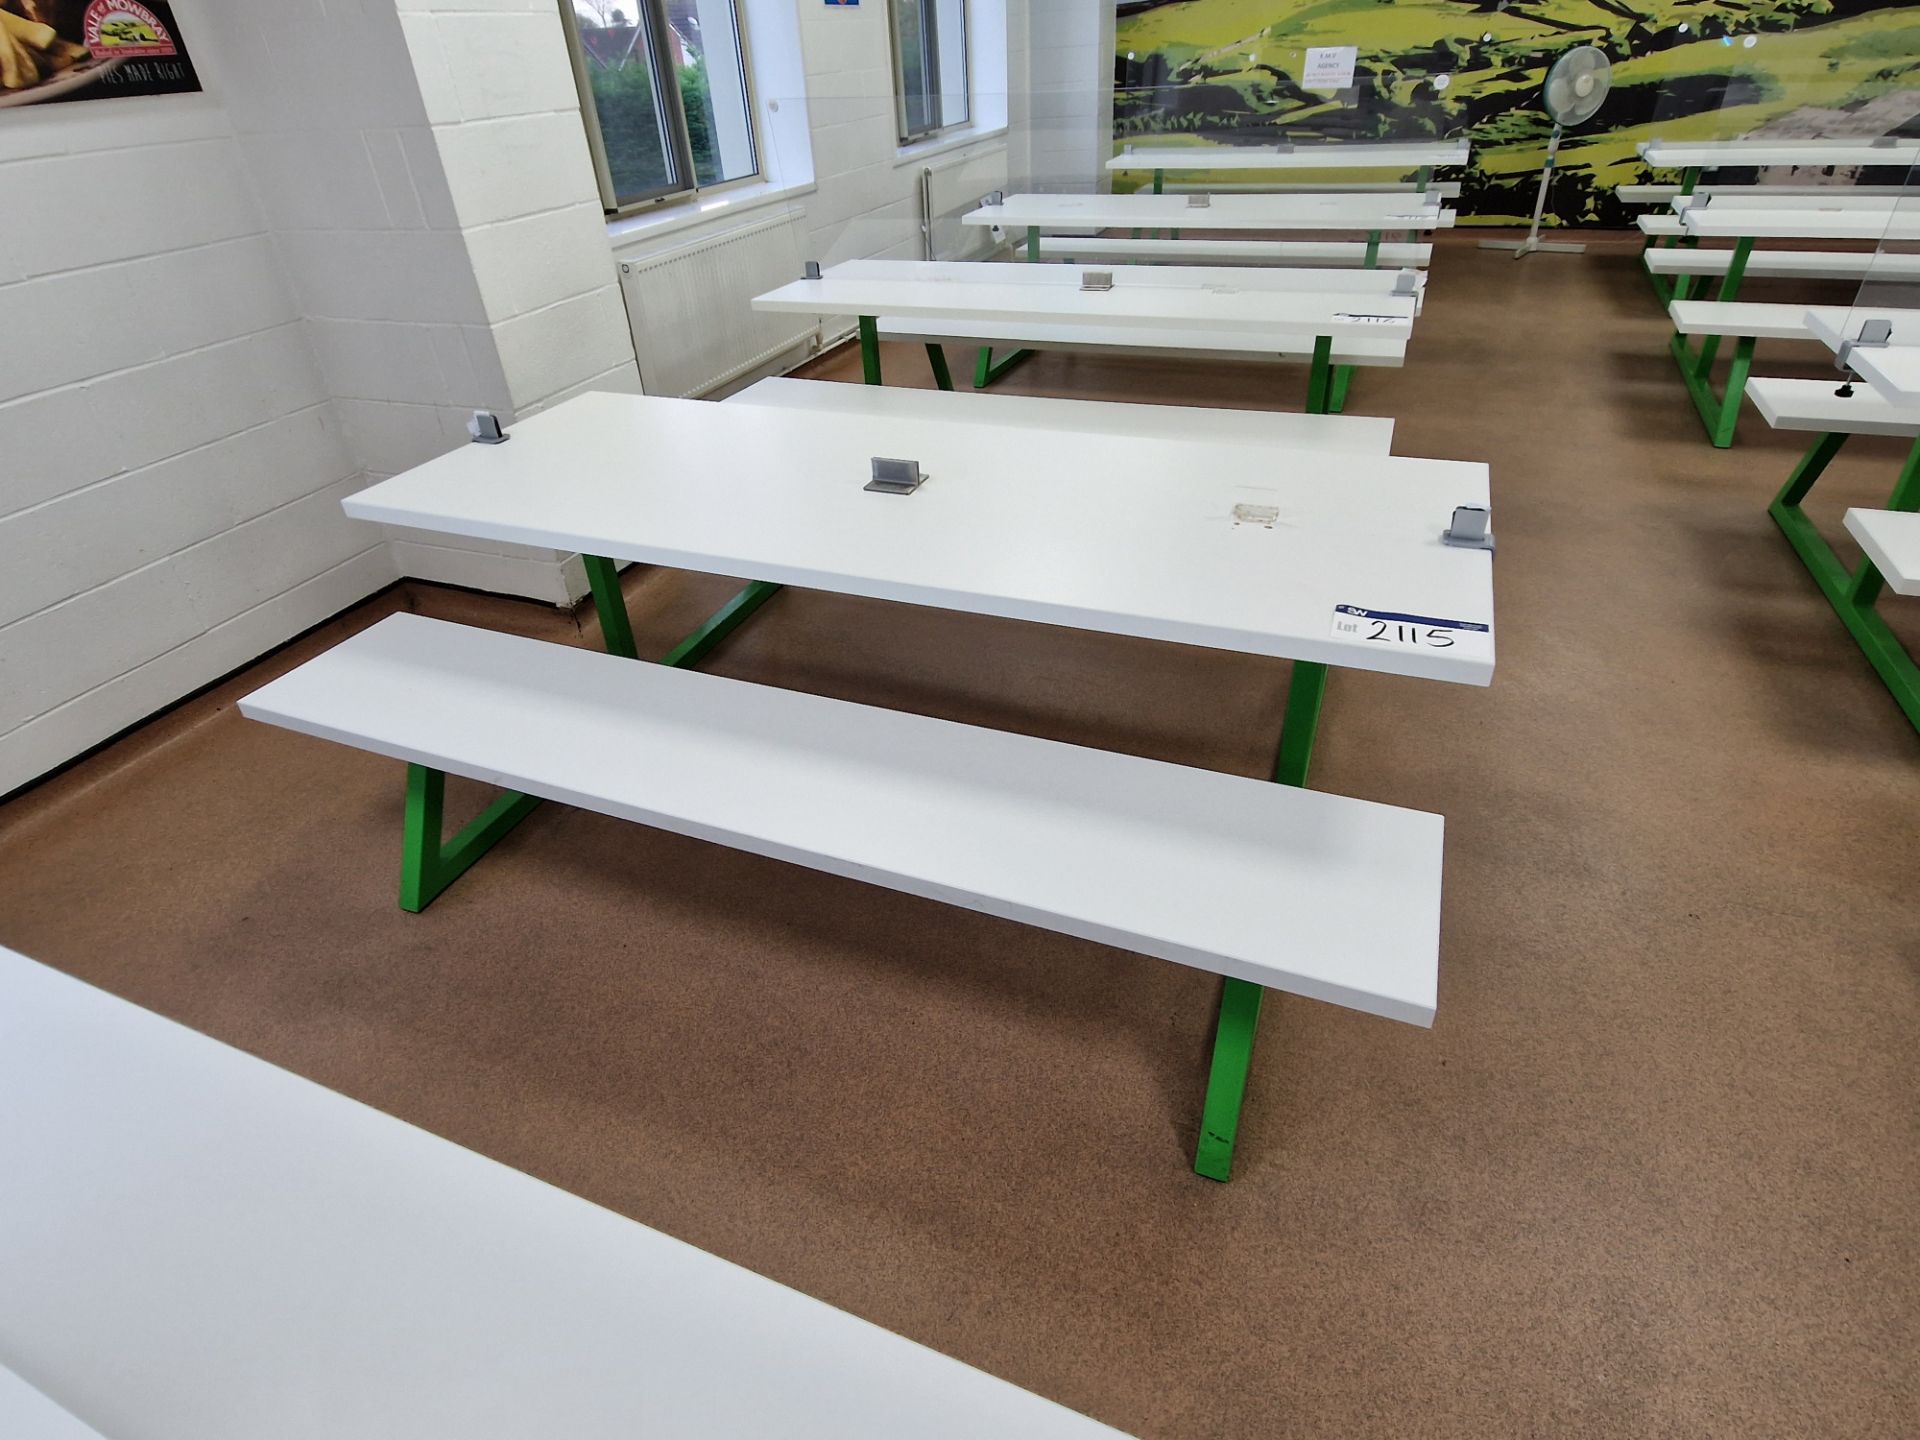 Two Metal Framed Wooden Top Canteen Benches